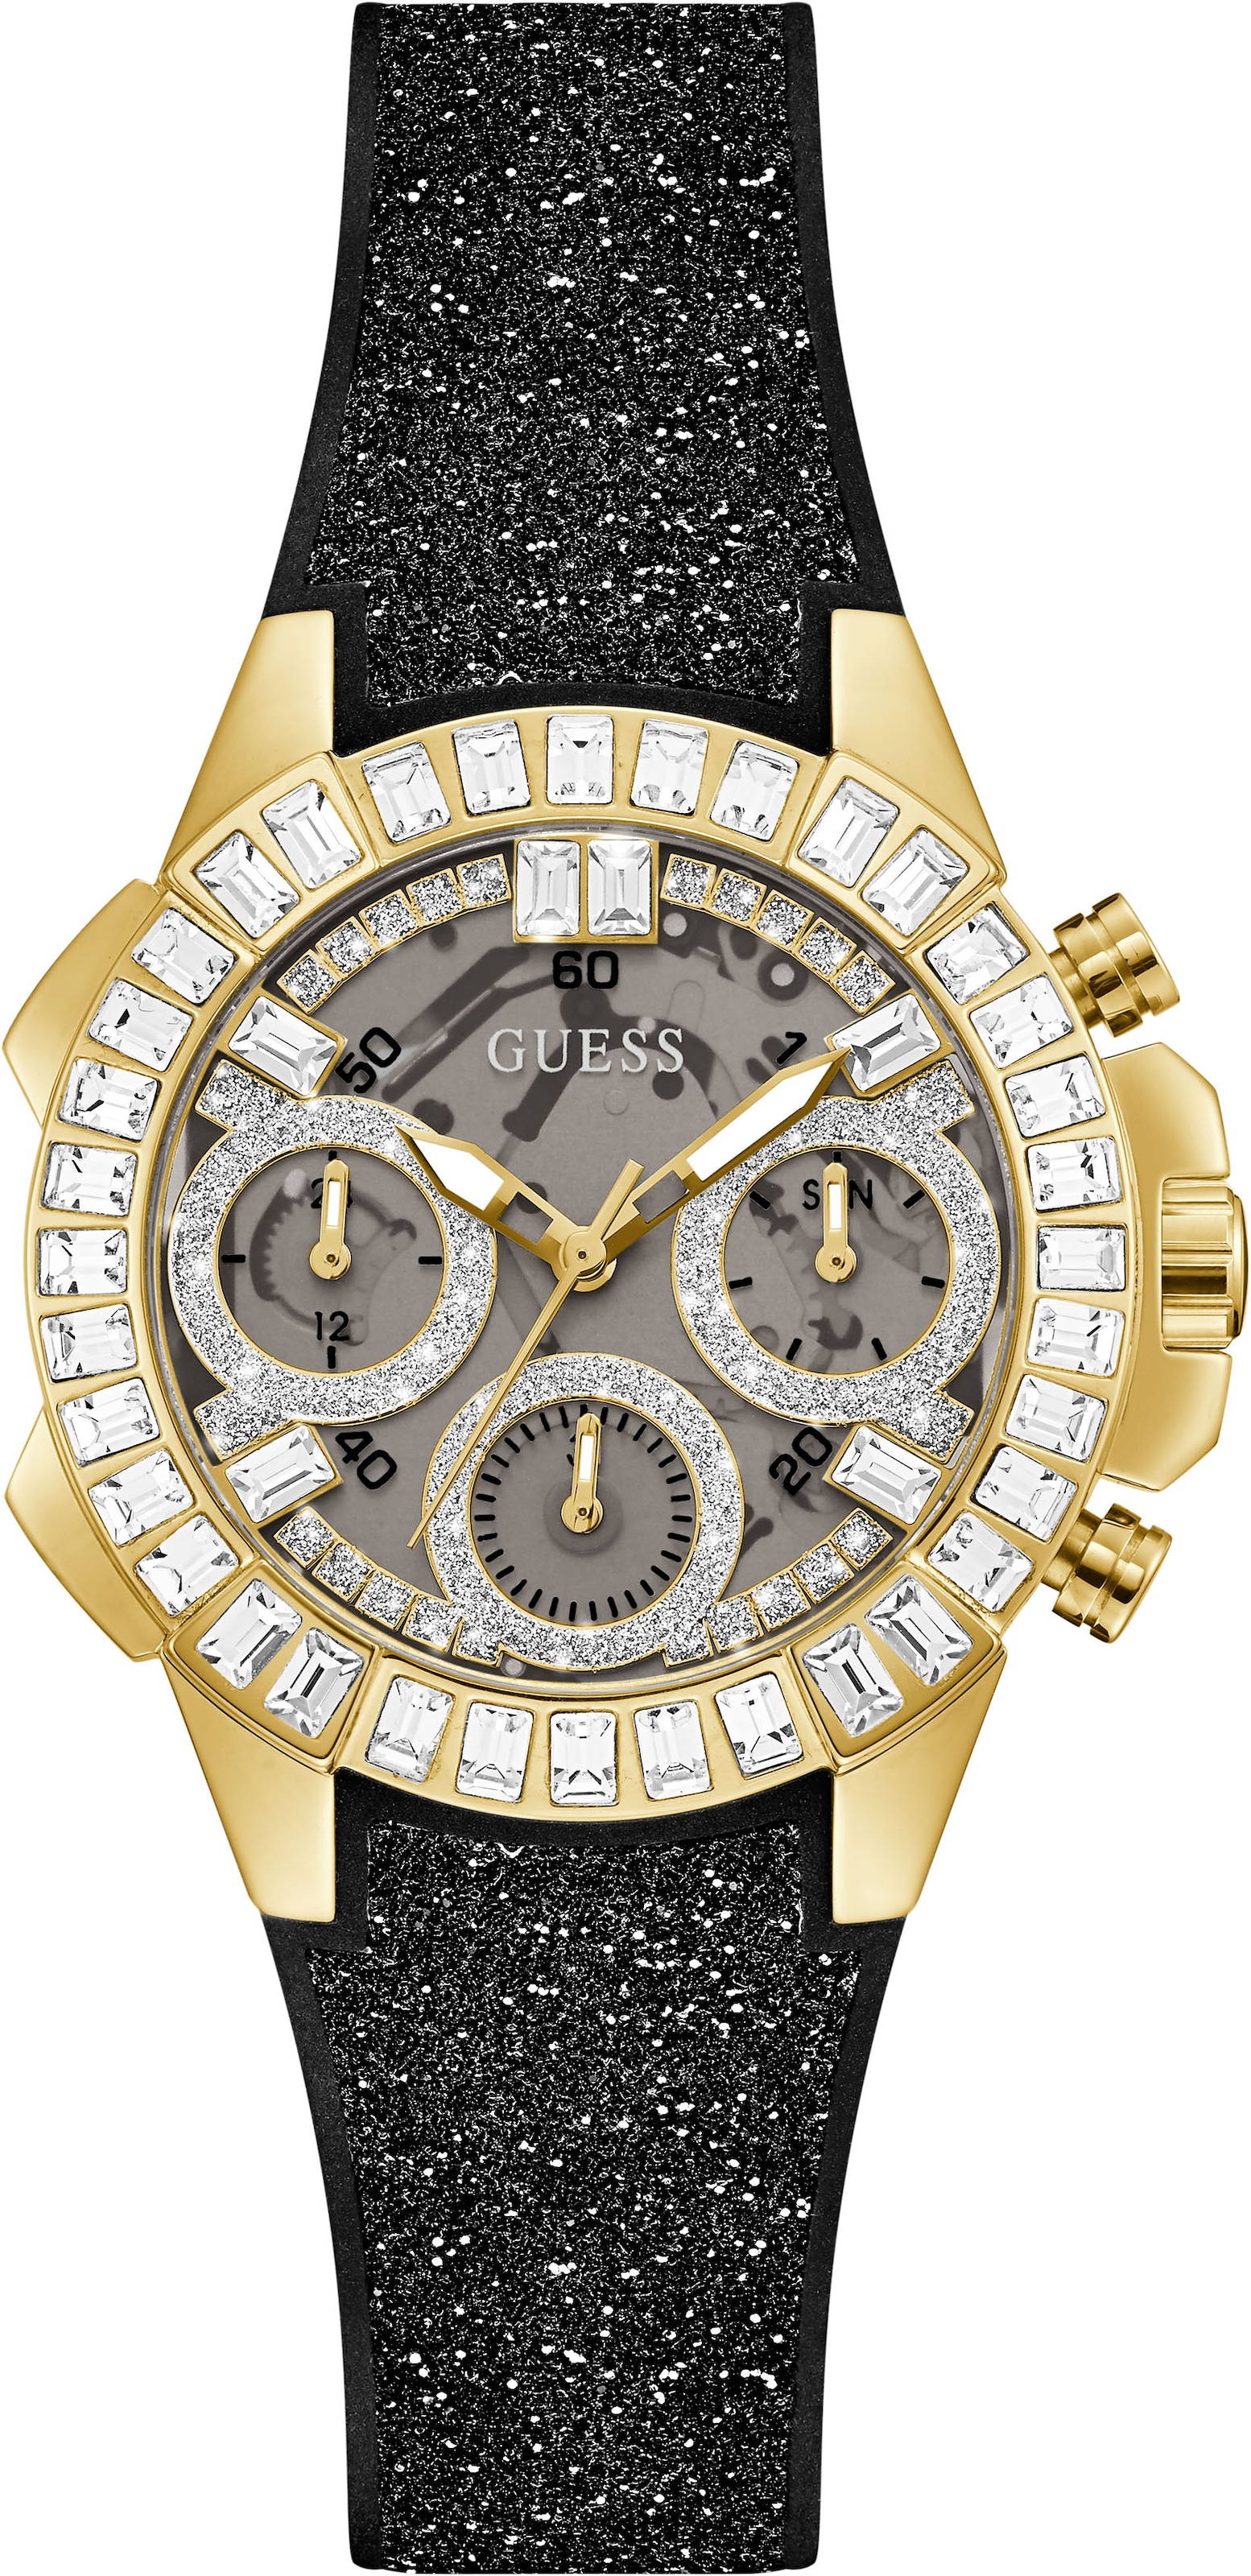 Top-Innovation Guess Multifunktionsuhr »GW0313L2,BOMBSHELL« kaufen OTTO bei